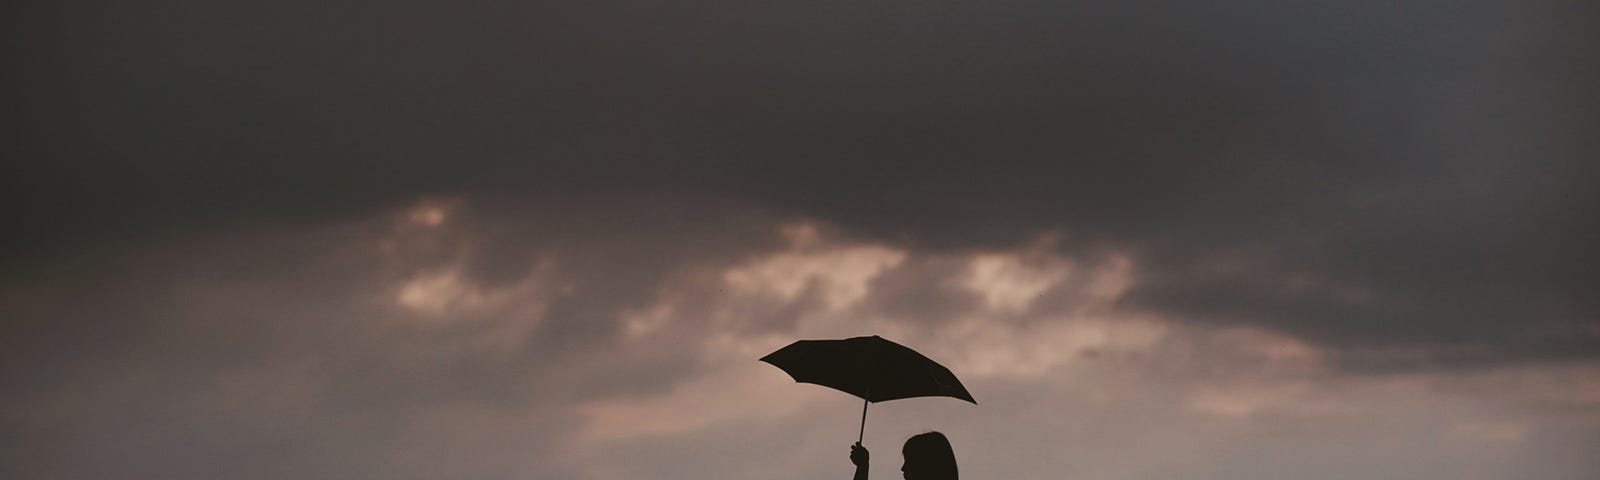 Person holding umbrella over child in a field on a stormy day